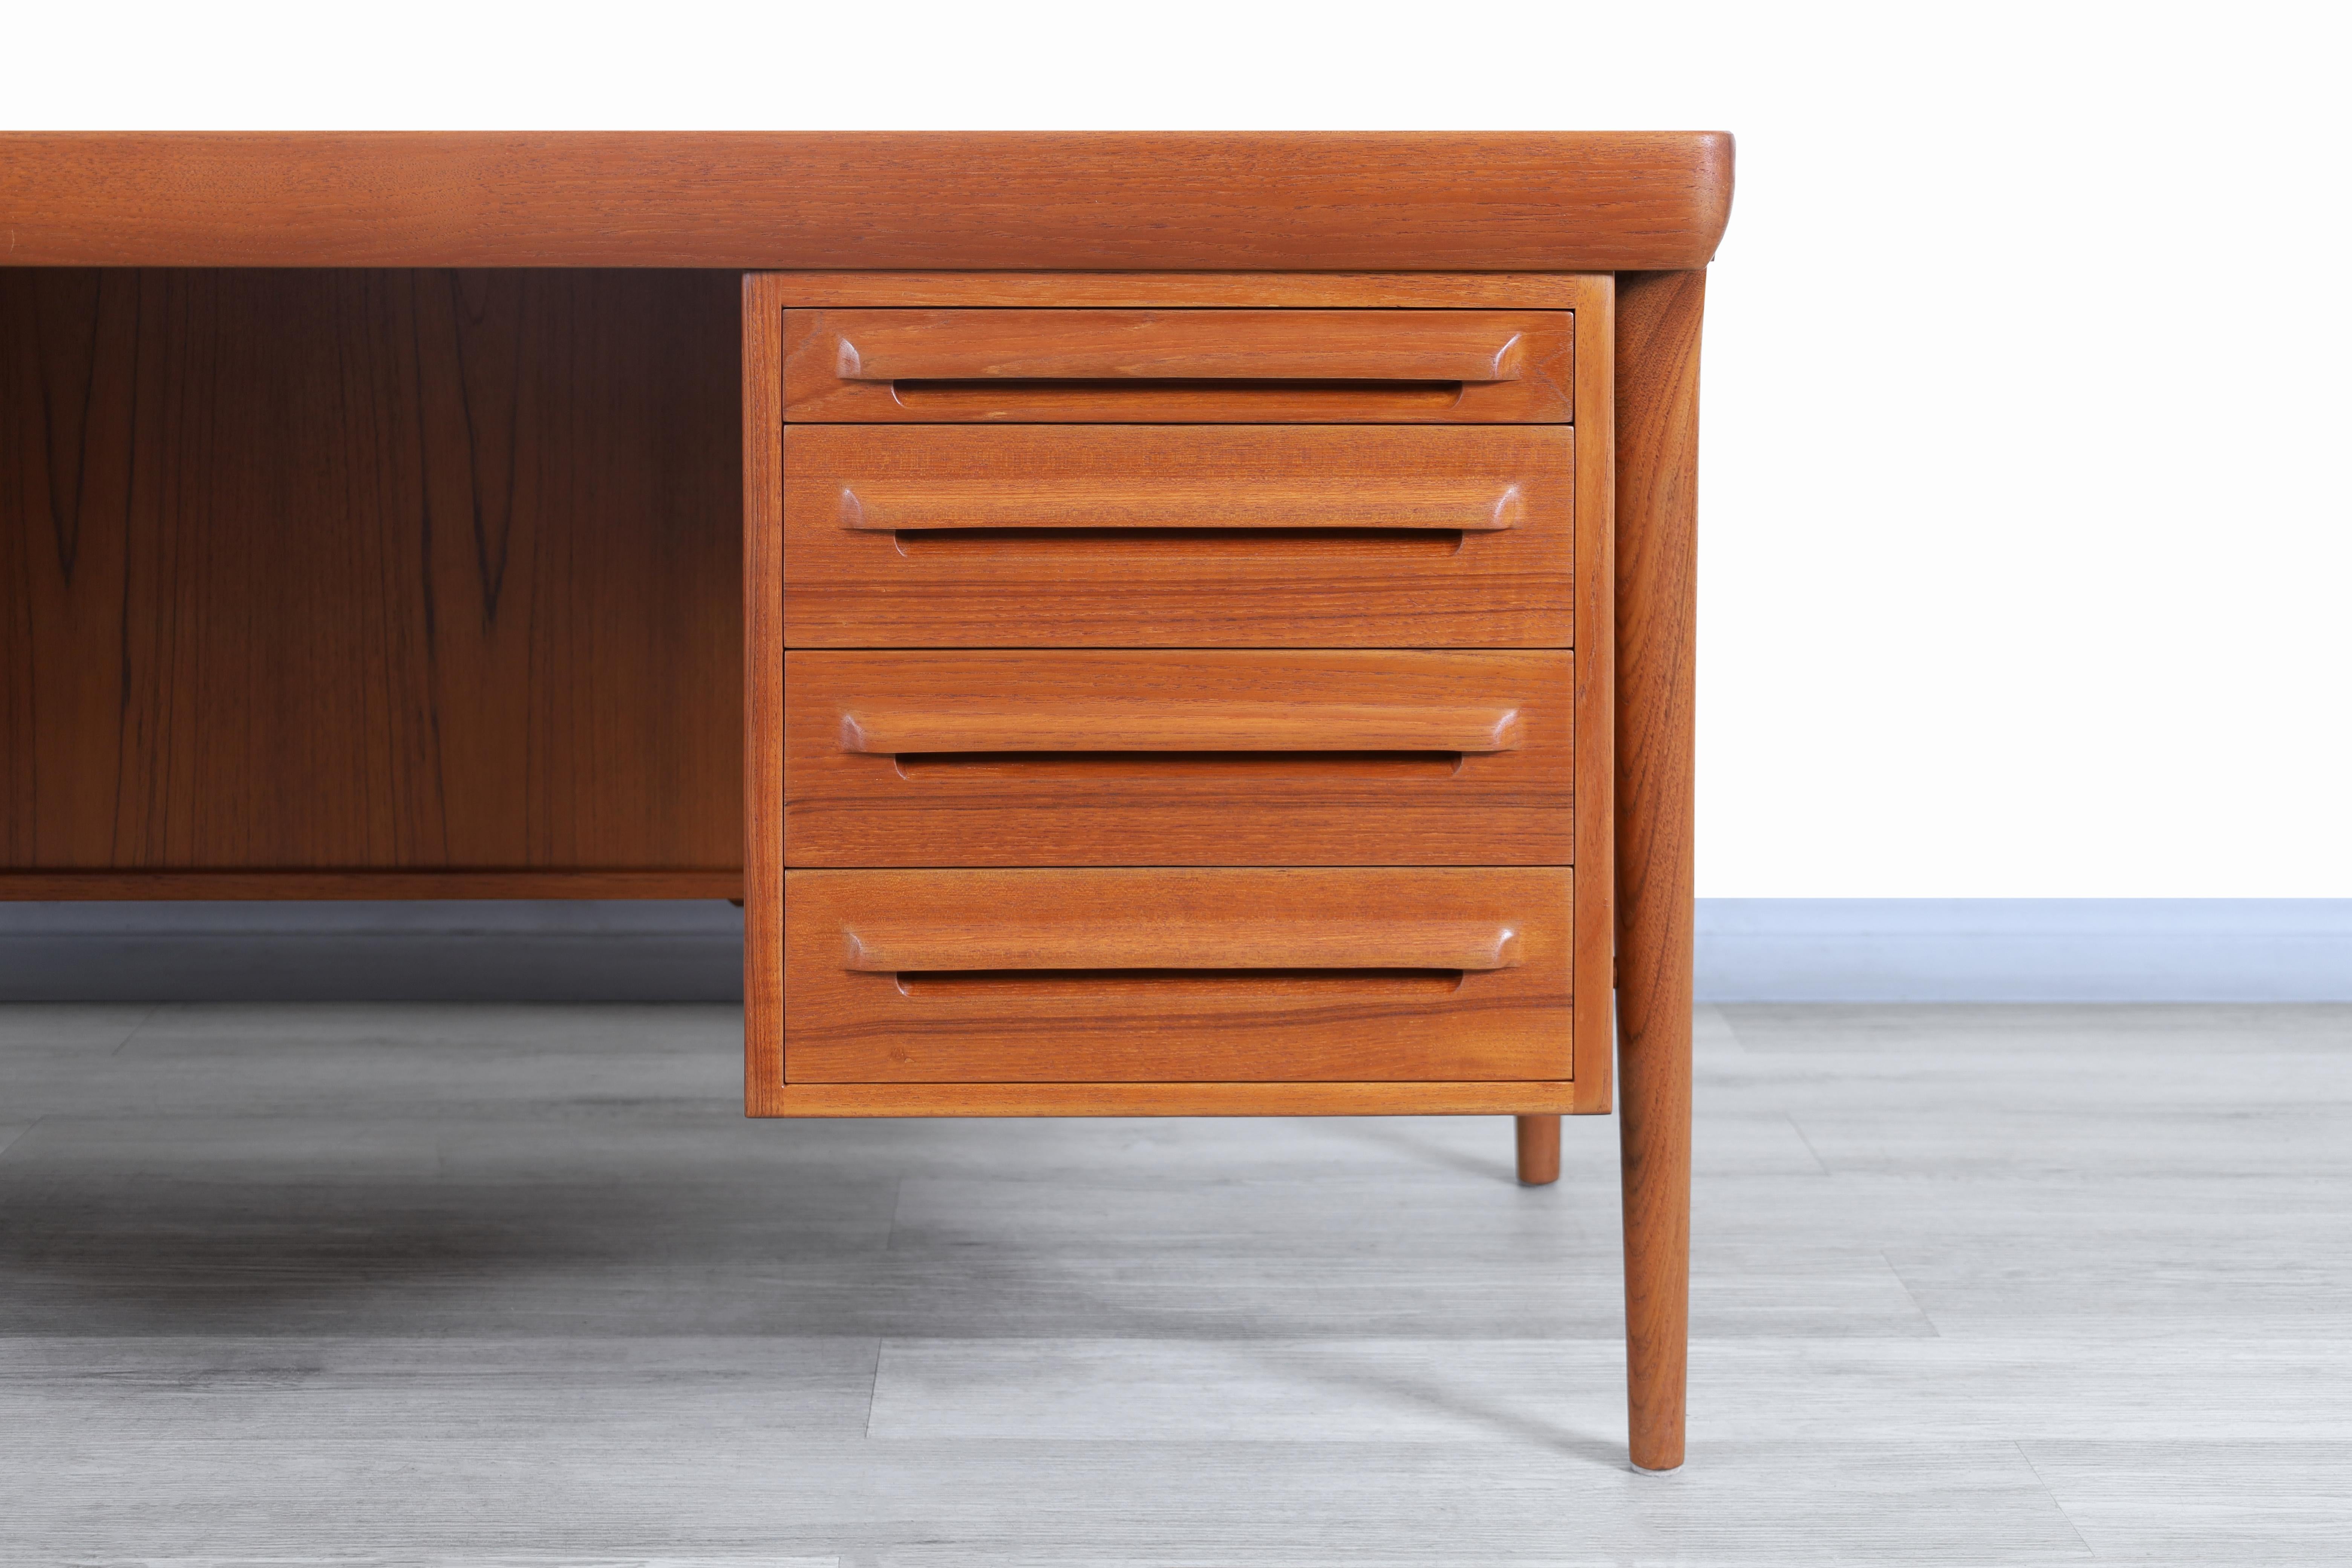 Danish Modern Teak Executive Desk by Ib Kofod Larsen In Excellent Condition For Sale In North Hollywood, CA